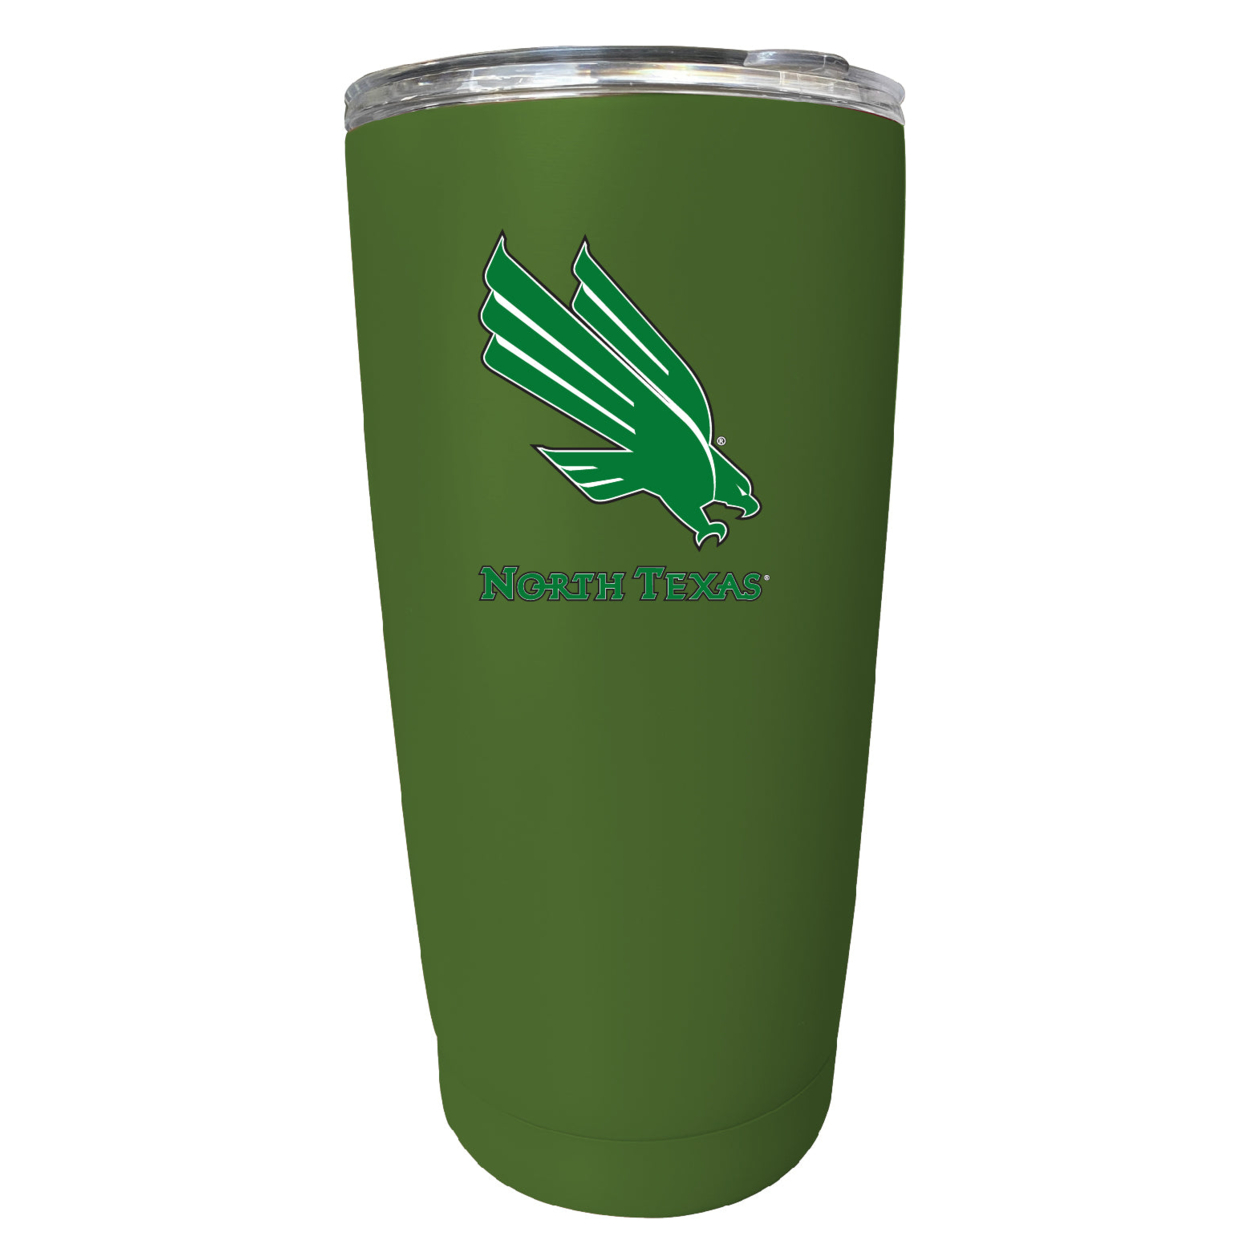 North Texas 16 Oz Stainless Steel Insulated Tumbler - Green